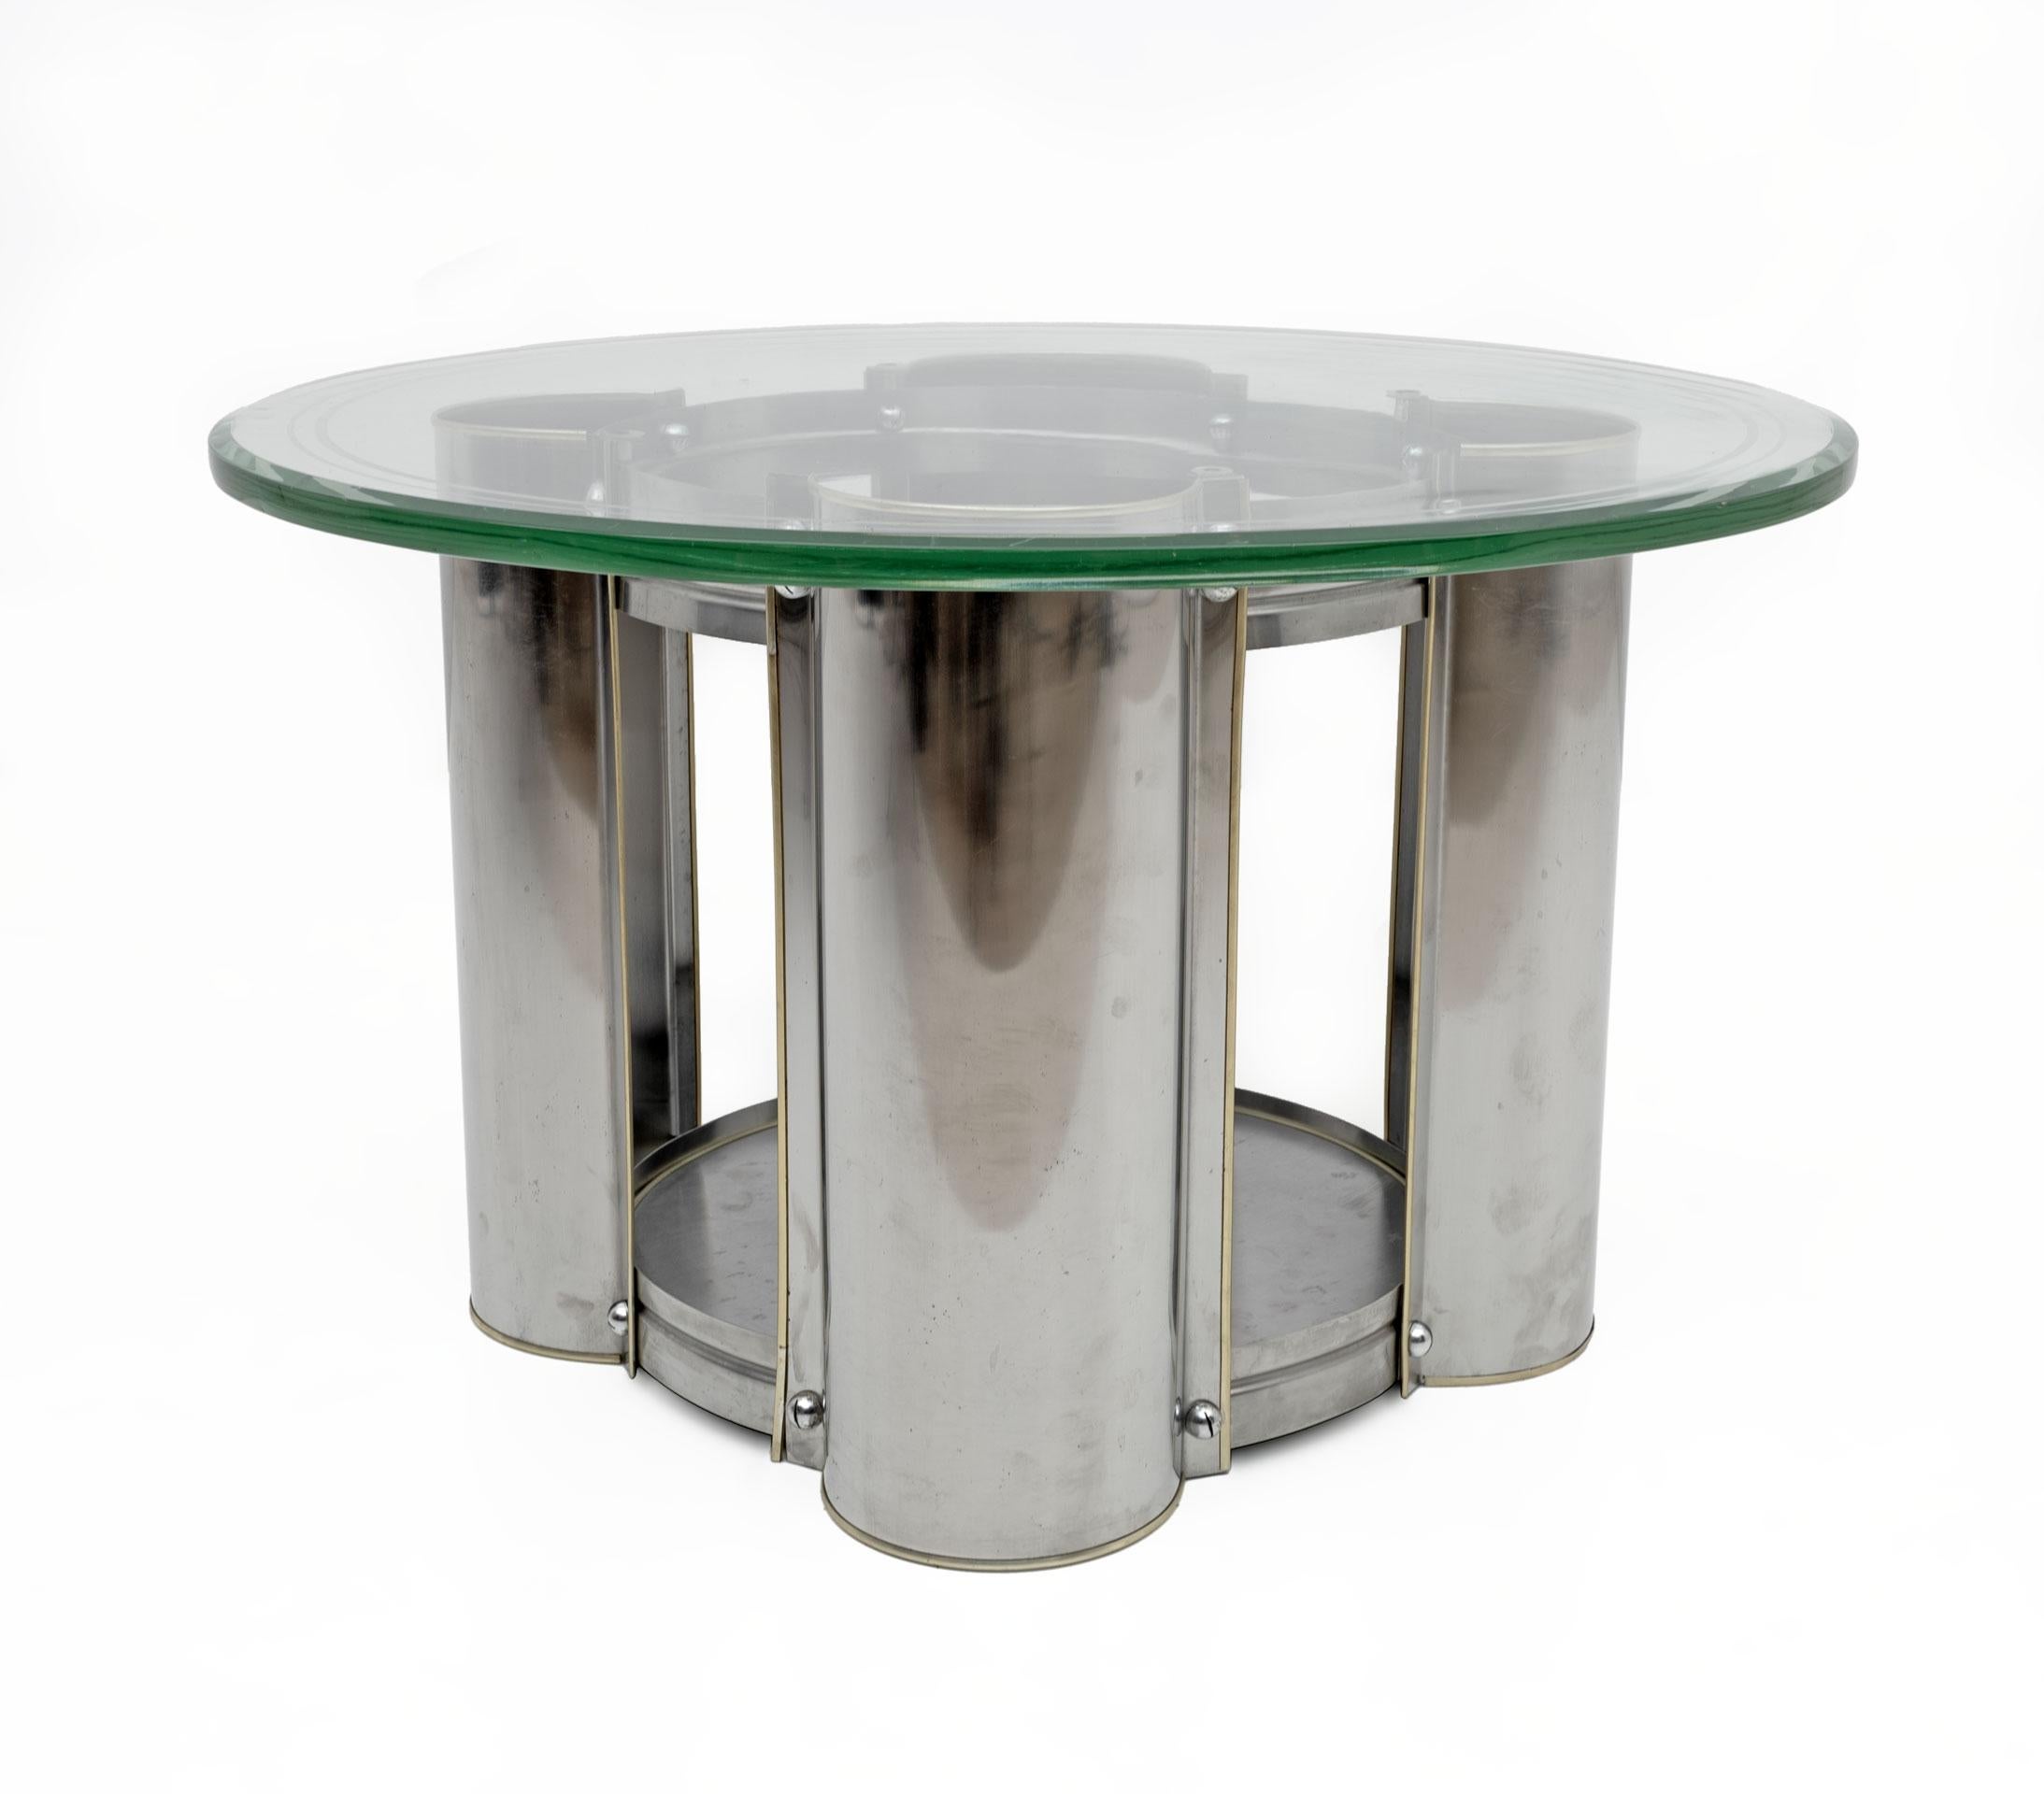 Steel table and very thick glass top, the surface below acts as a bottle holder. Italian production from the 70s,
Small signs of aging